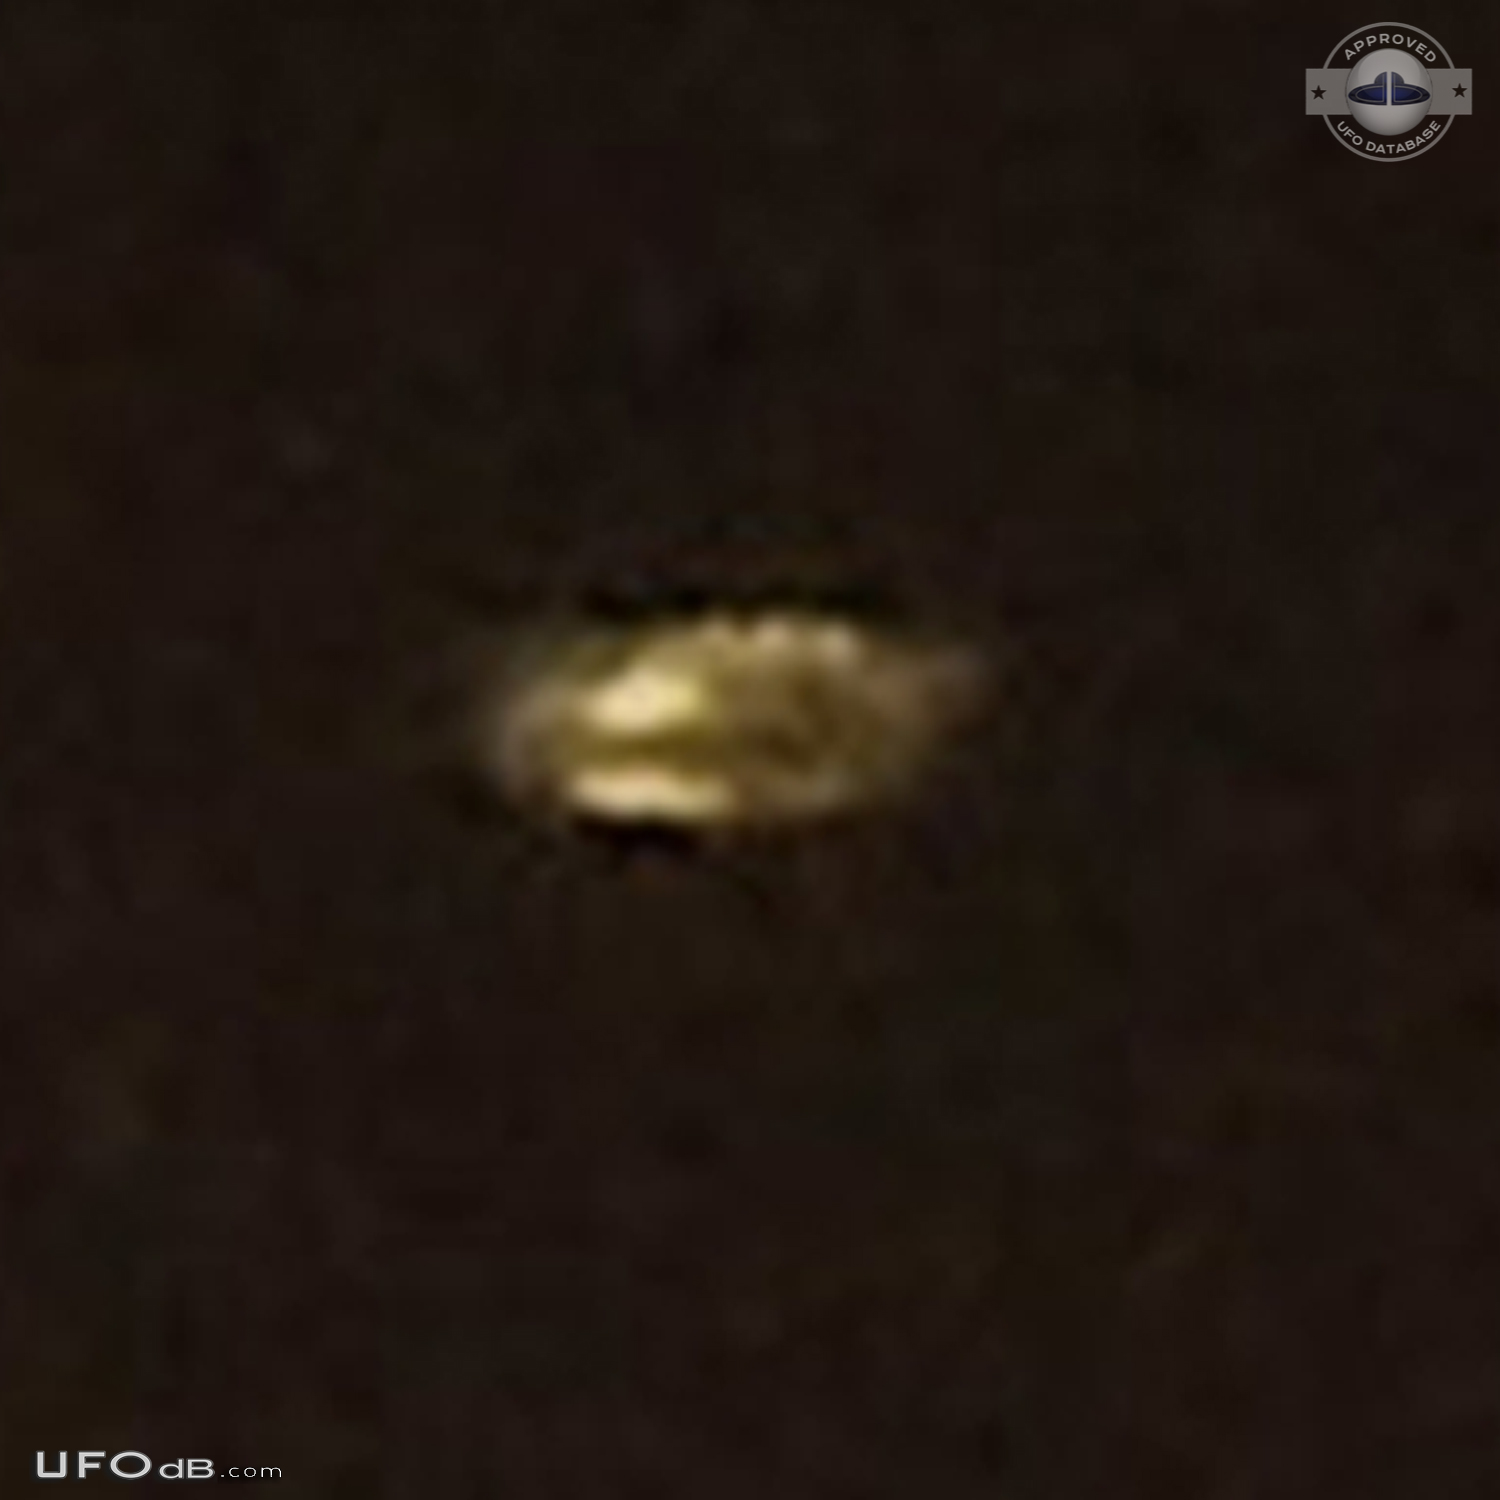 Distance UFO sighting, Appears to be circular shape - Tennessee 2014 UFO Picture #700-4